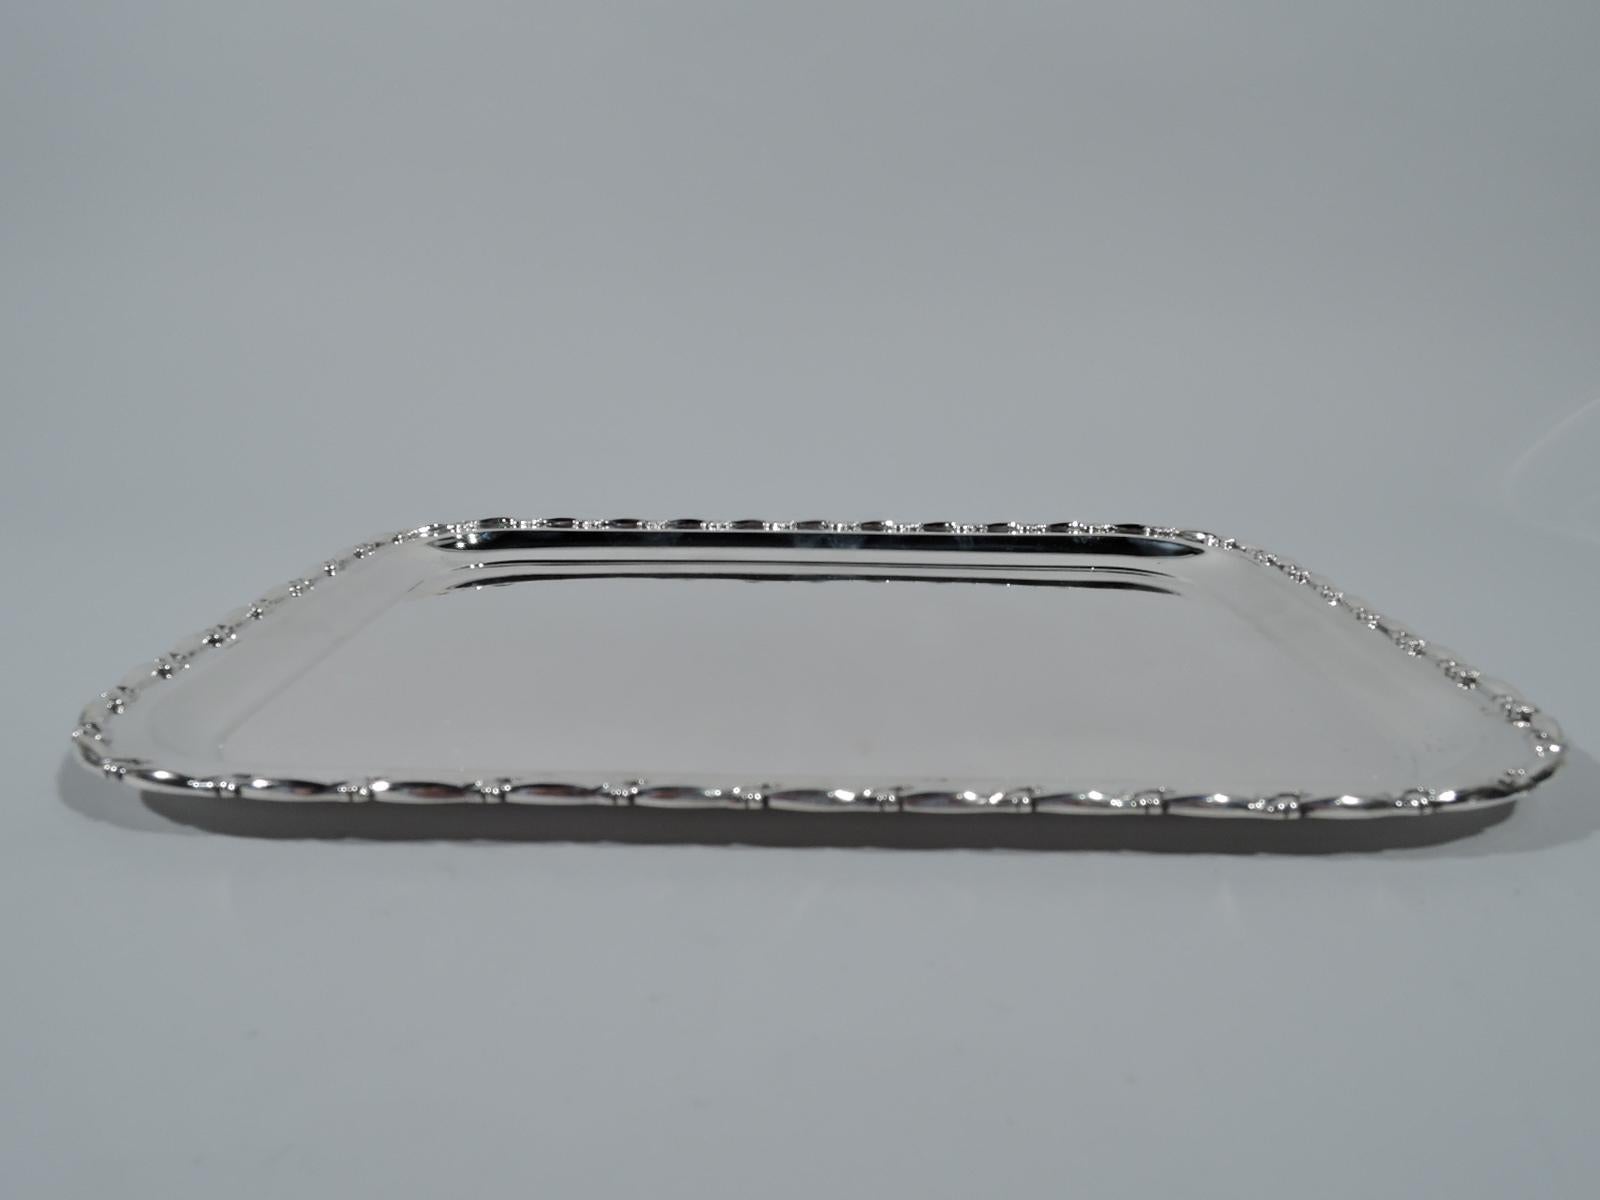 Pretty Midcentury sterling silver tray. Made by Reed & Barton in Taunton, Mass. Rectangular well with curved corners and flat rim with applied leaf ornament. Hallmark includes no. 388. Weight: 19.3 troy ounces.